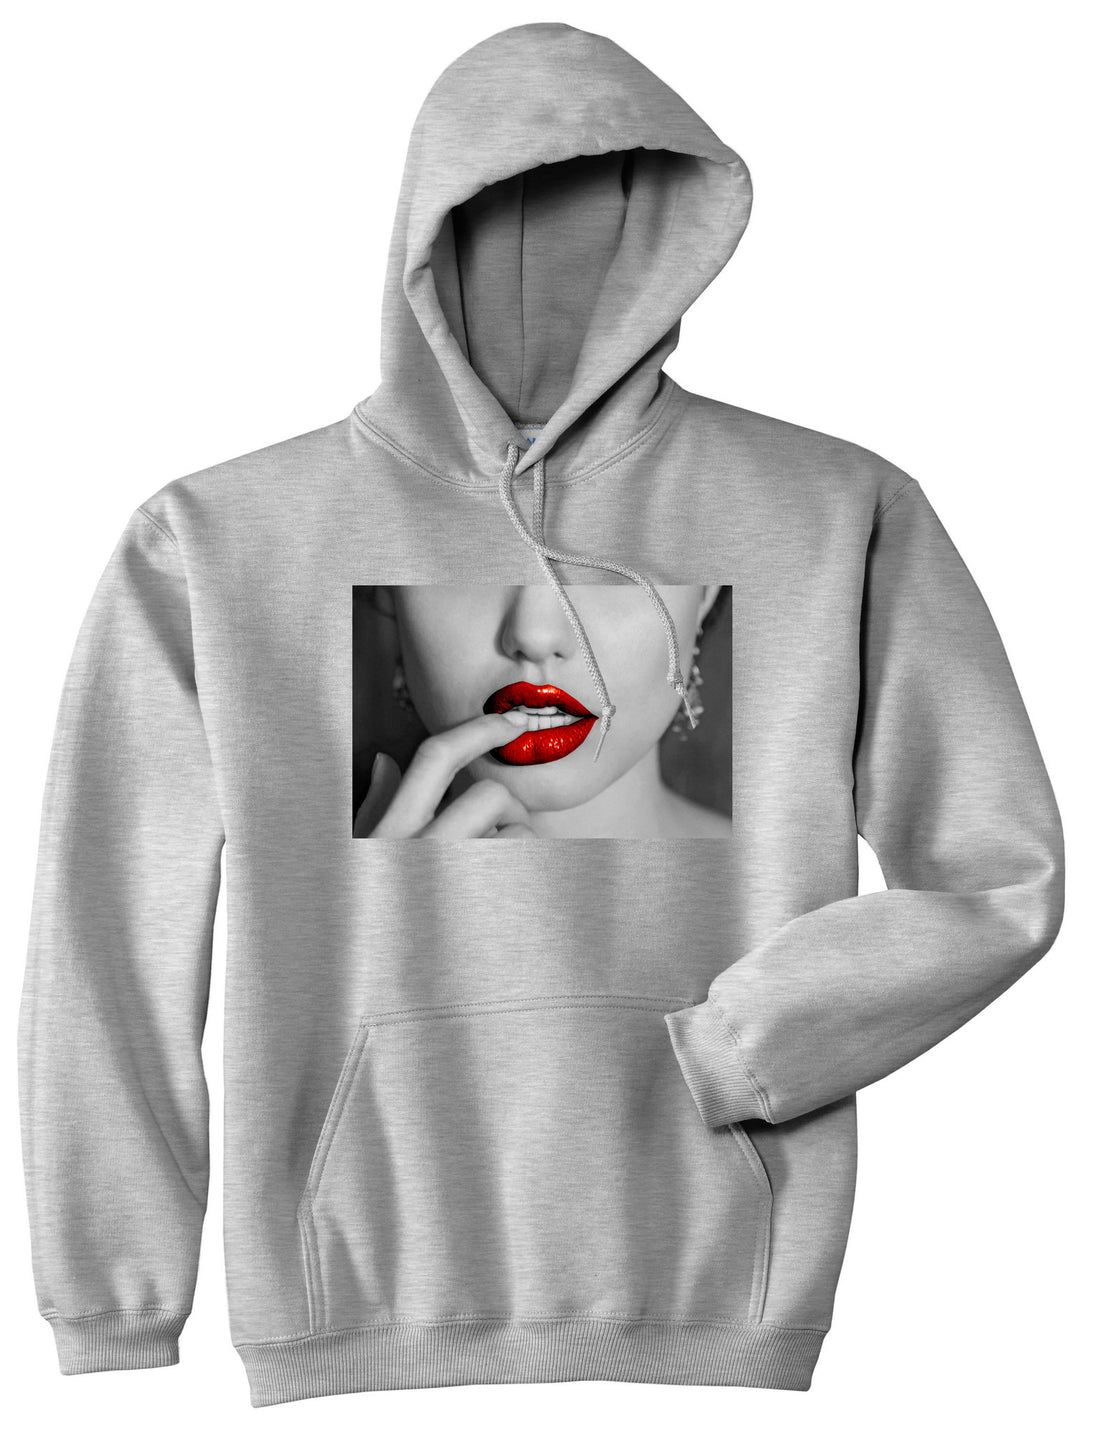  Angelina Red by Kings Of NY Lips Jolie Sexy Hot Picture Boys Kids Pullover Hoodie Hoody In Grey by Kings Of NY